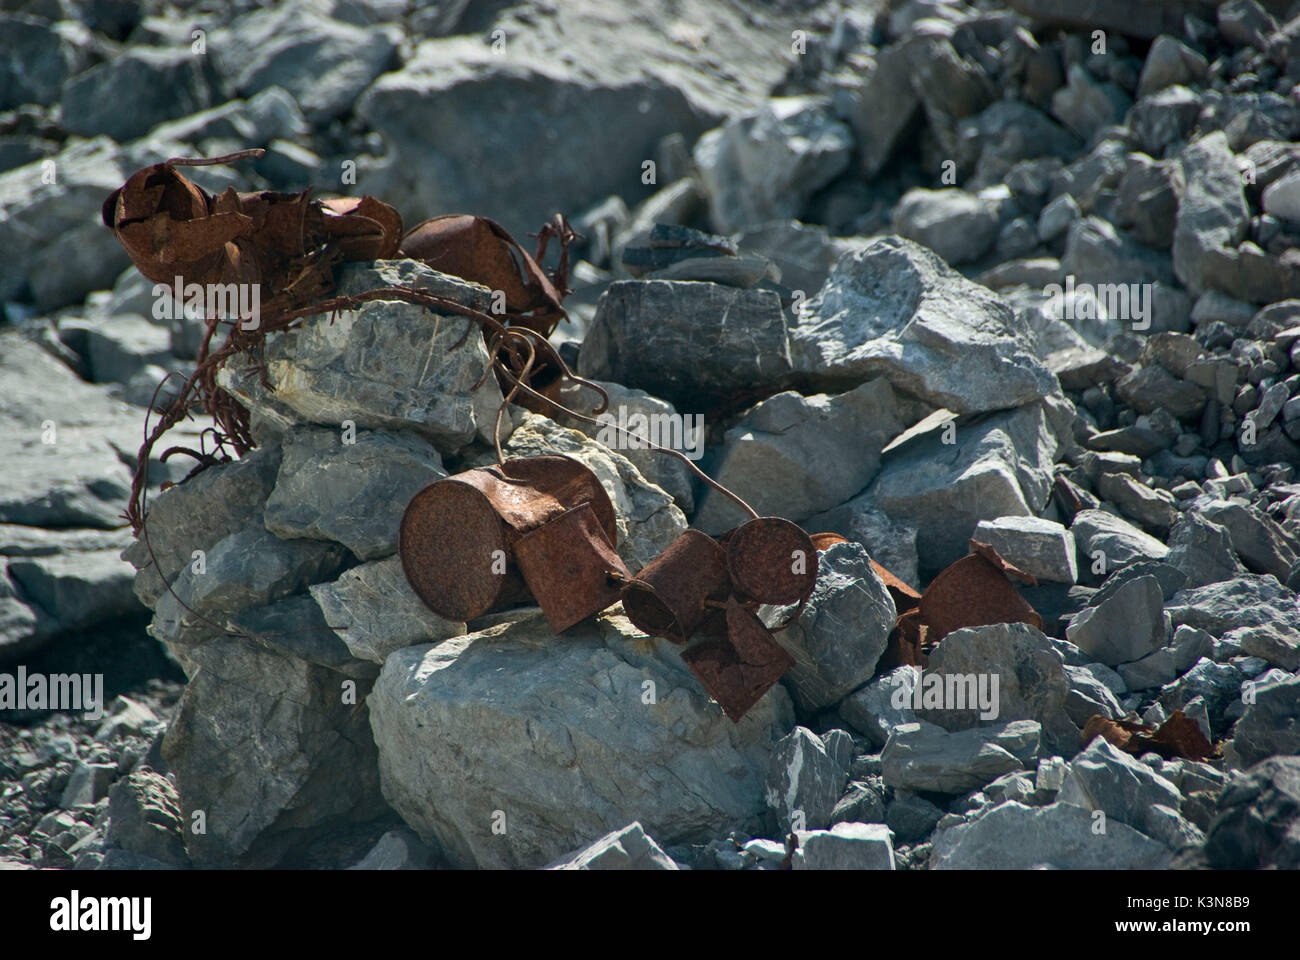 The remains of tin boxes, part of the ration of the Italian soldiers during the Great War,adandoned on the rocks of Santa Caterian Valfurva. Sondrio, Lombardy, Italy Stock Photo